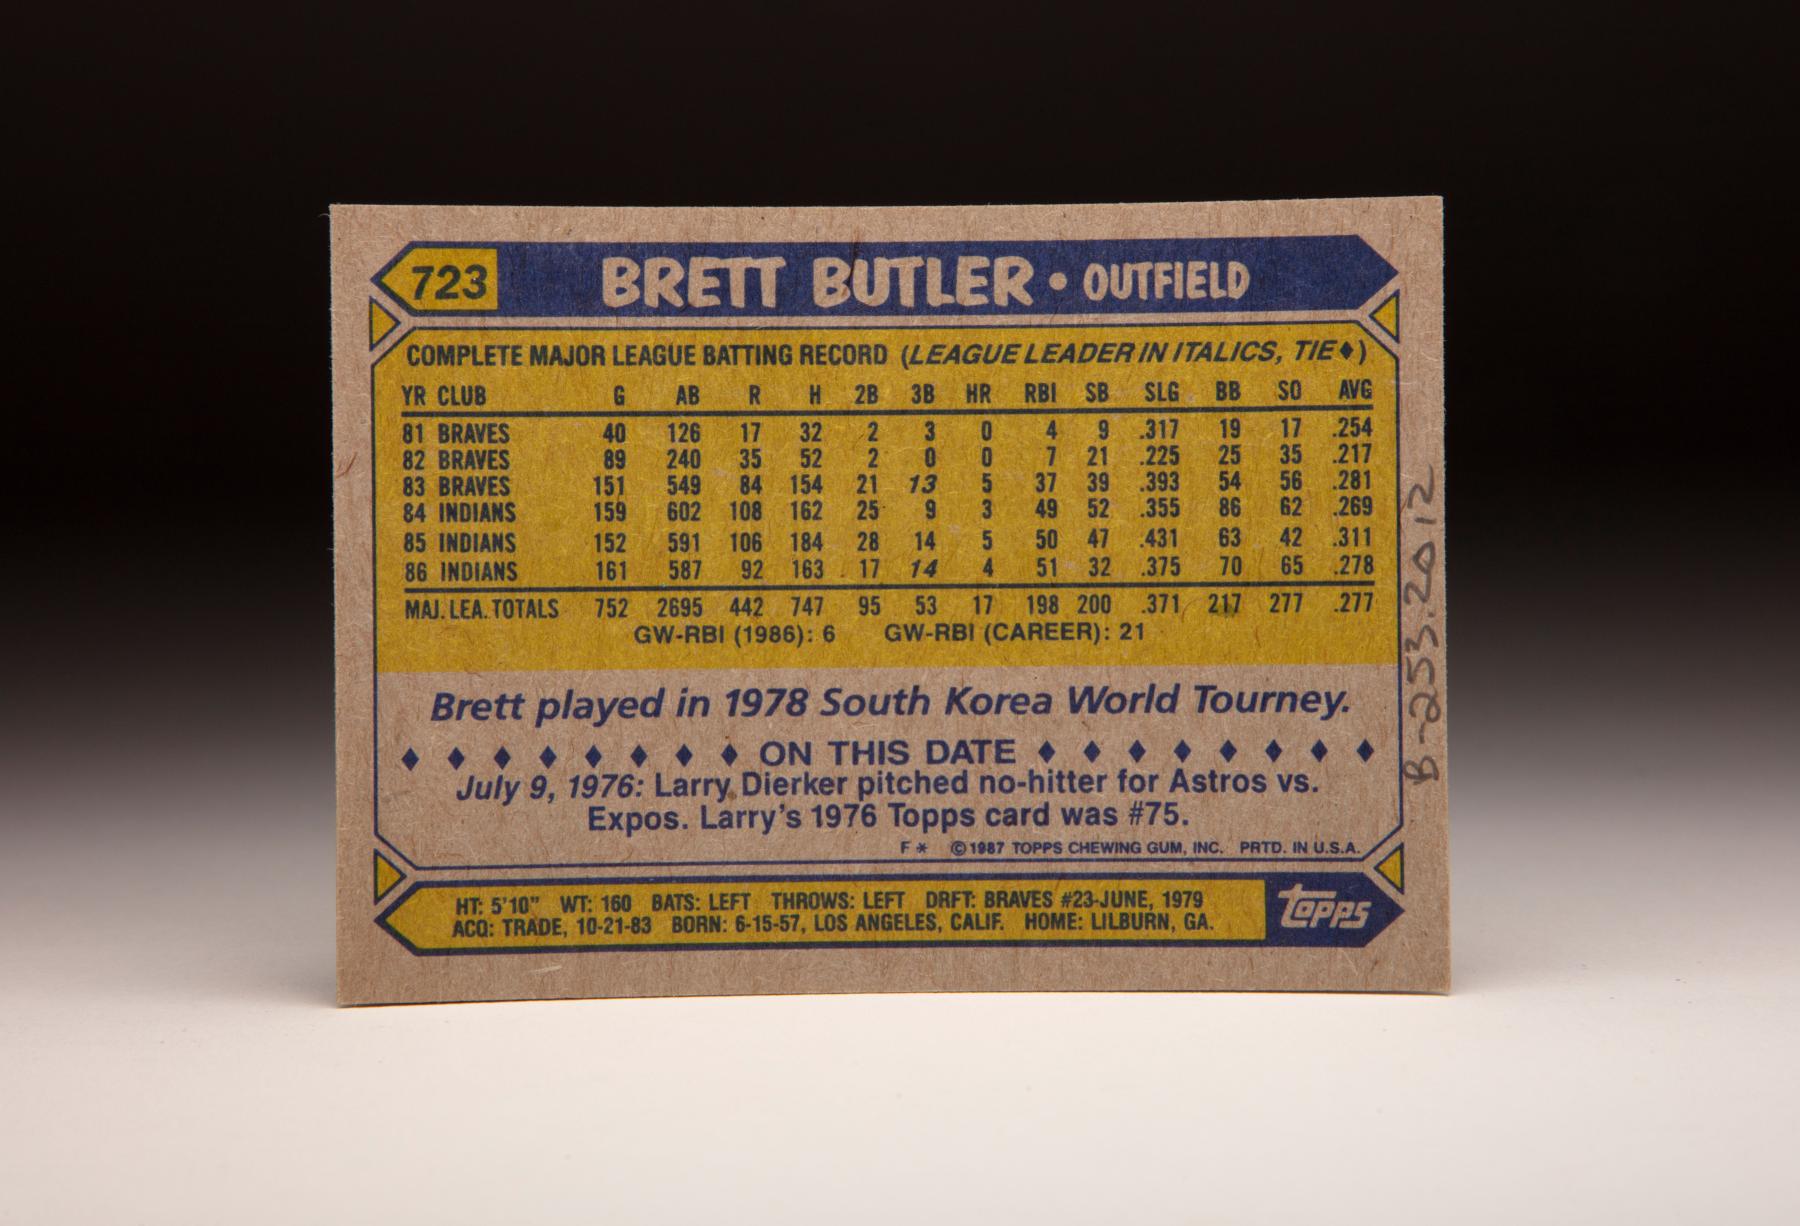 Dodgers history: Brett Butler and the lost art of the bunt hit